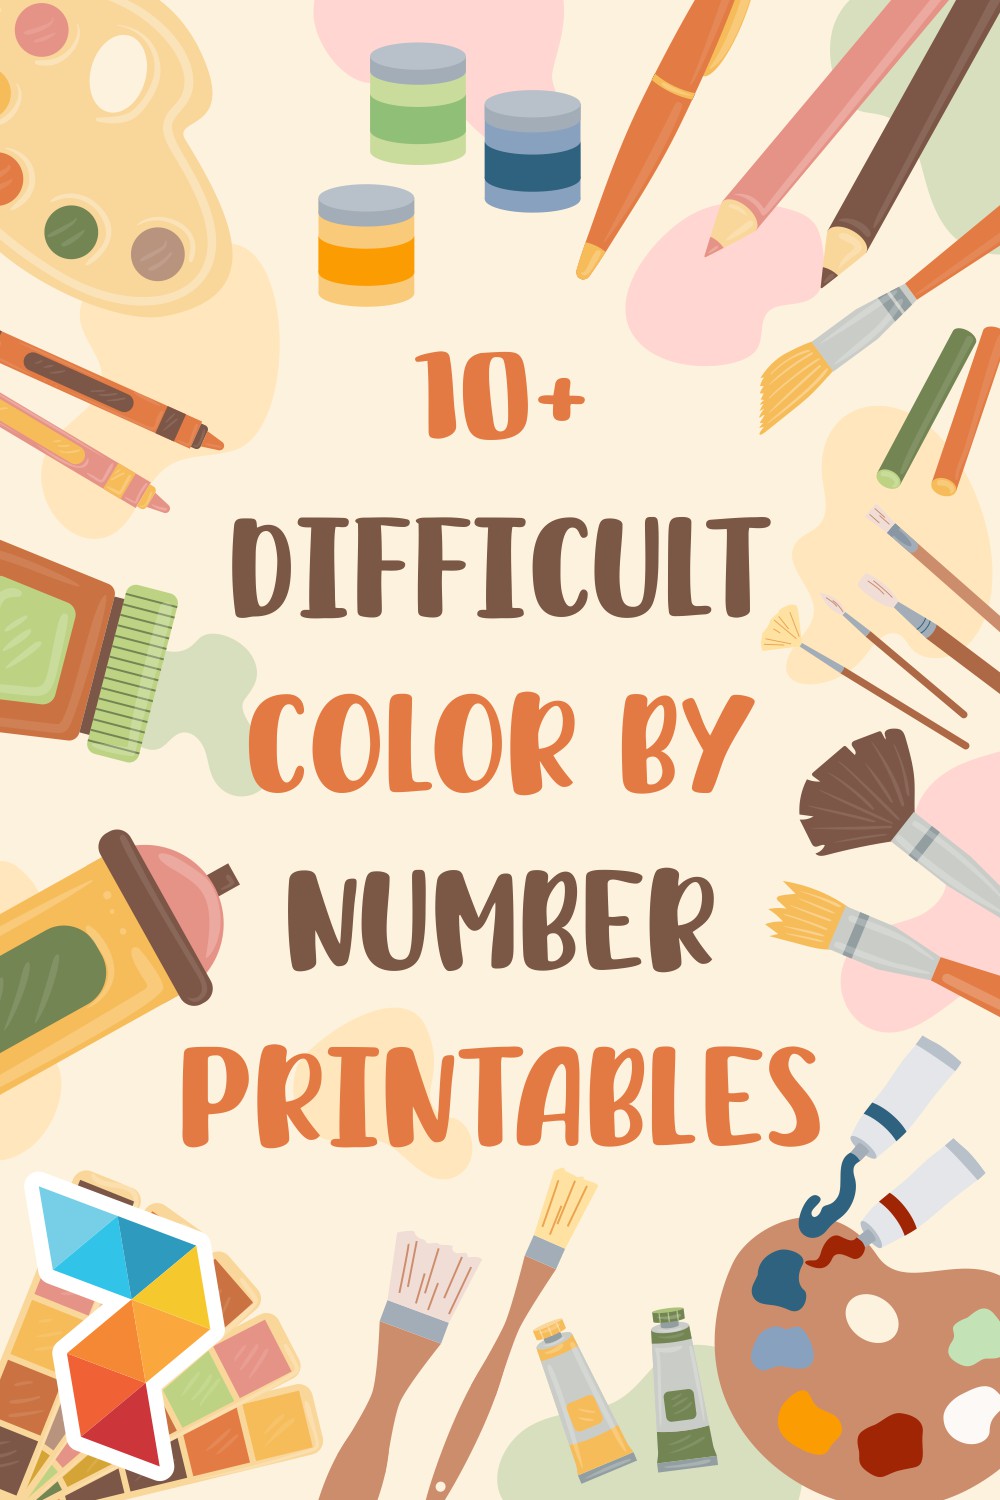 Difficult Color By Number